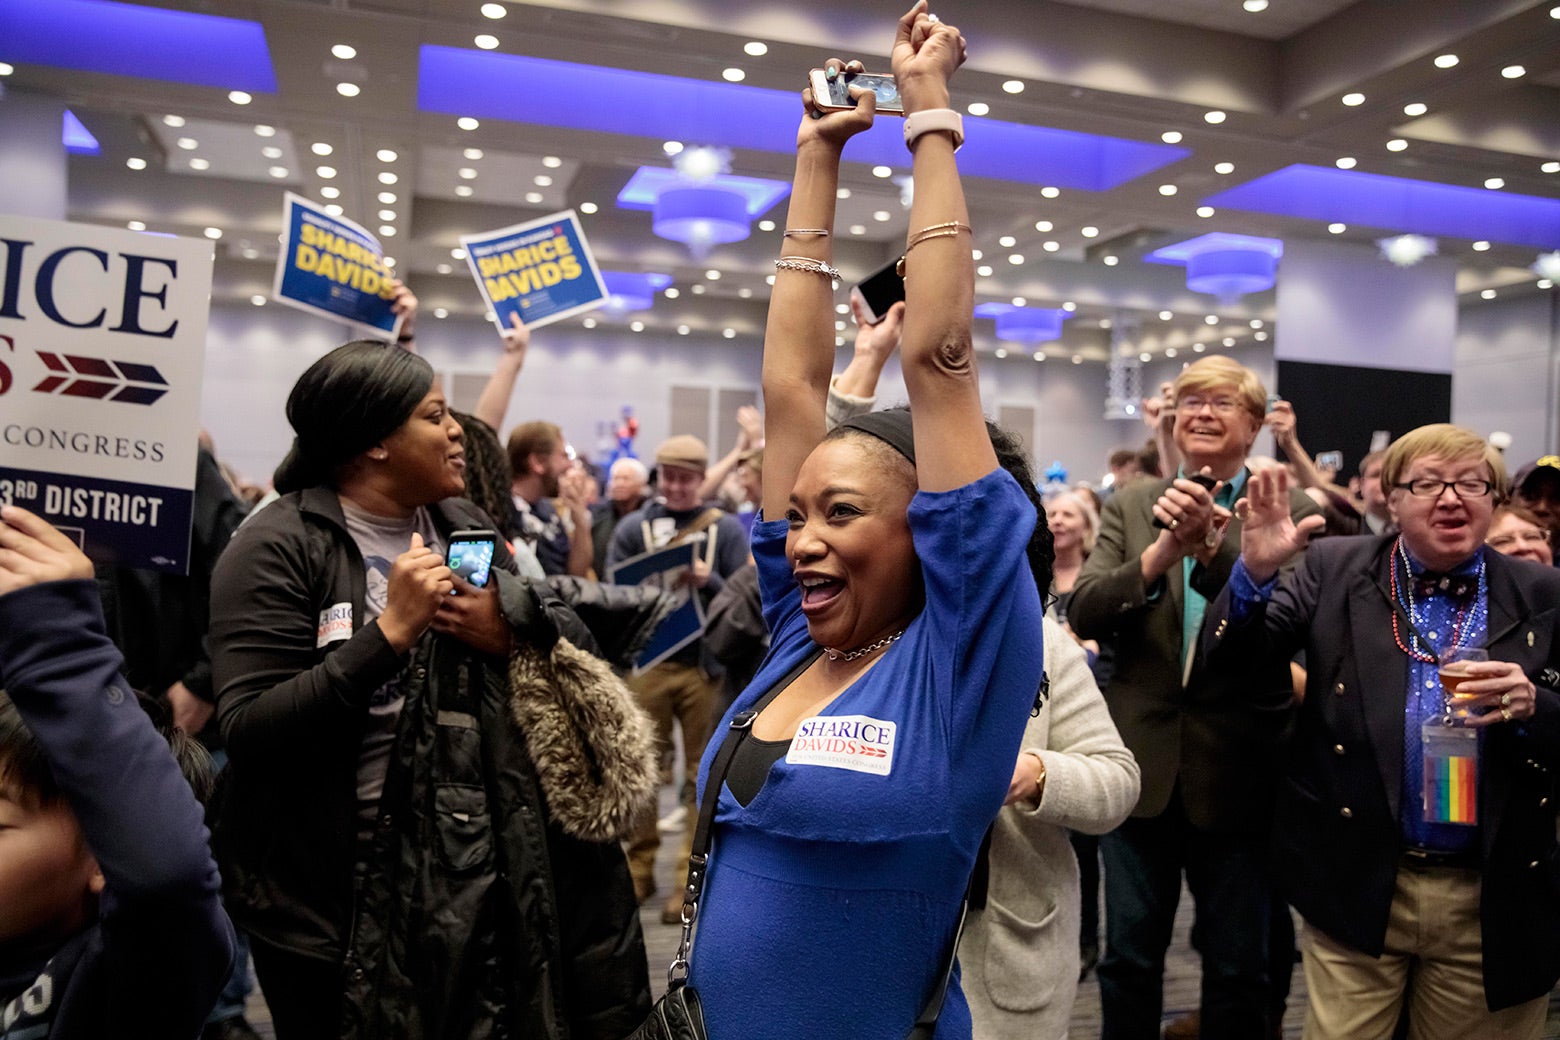 Supporters of Democratic candidate for Kansas' 3rd Congressional District Sharice Davids react to election results during a watch party on Nov. 6, 2018 in Olathe, Kansas.